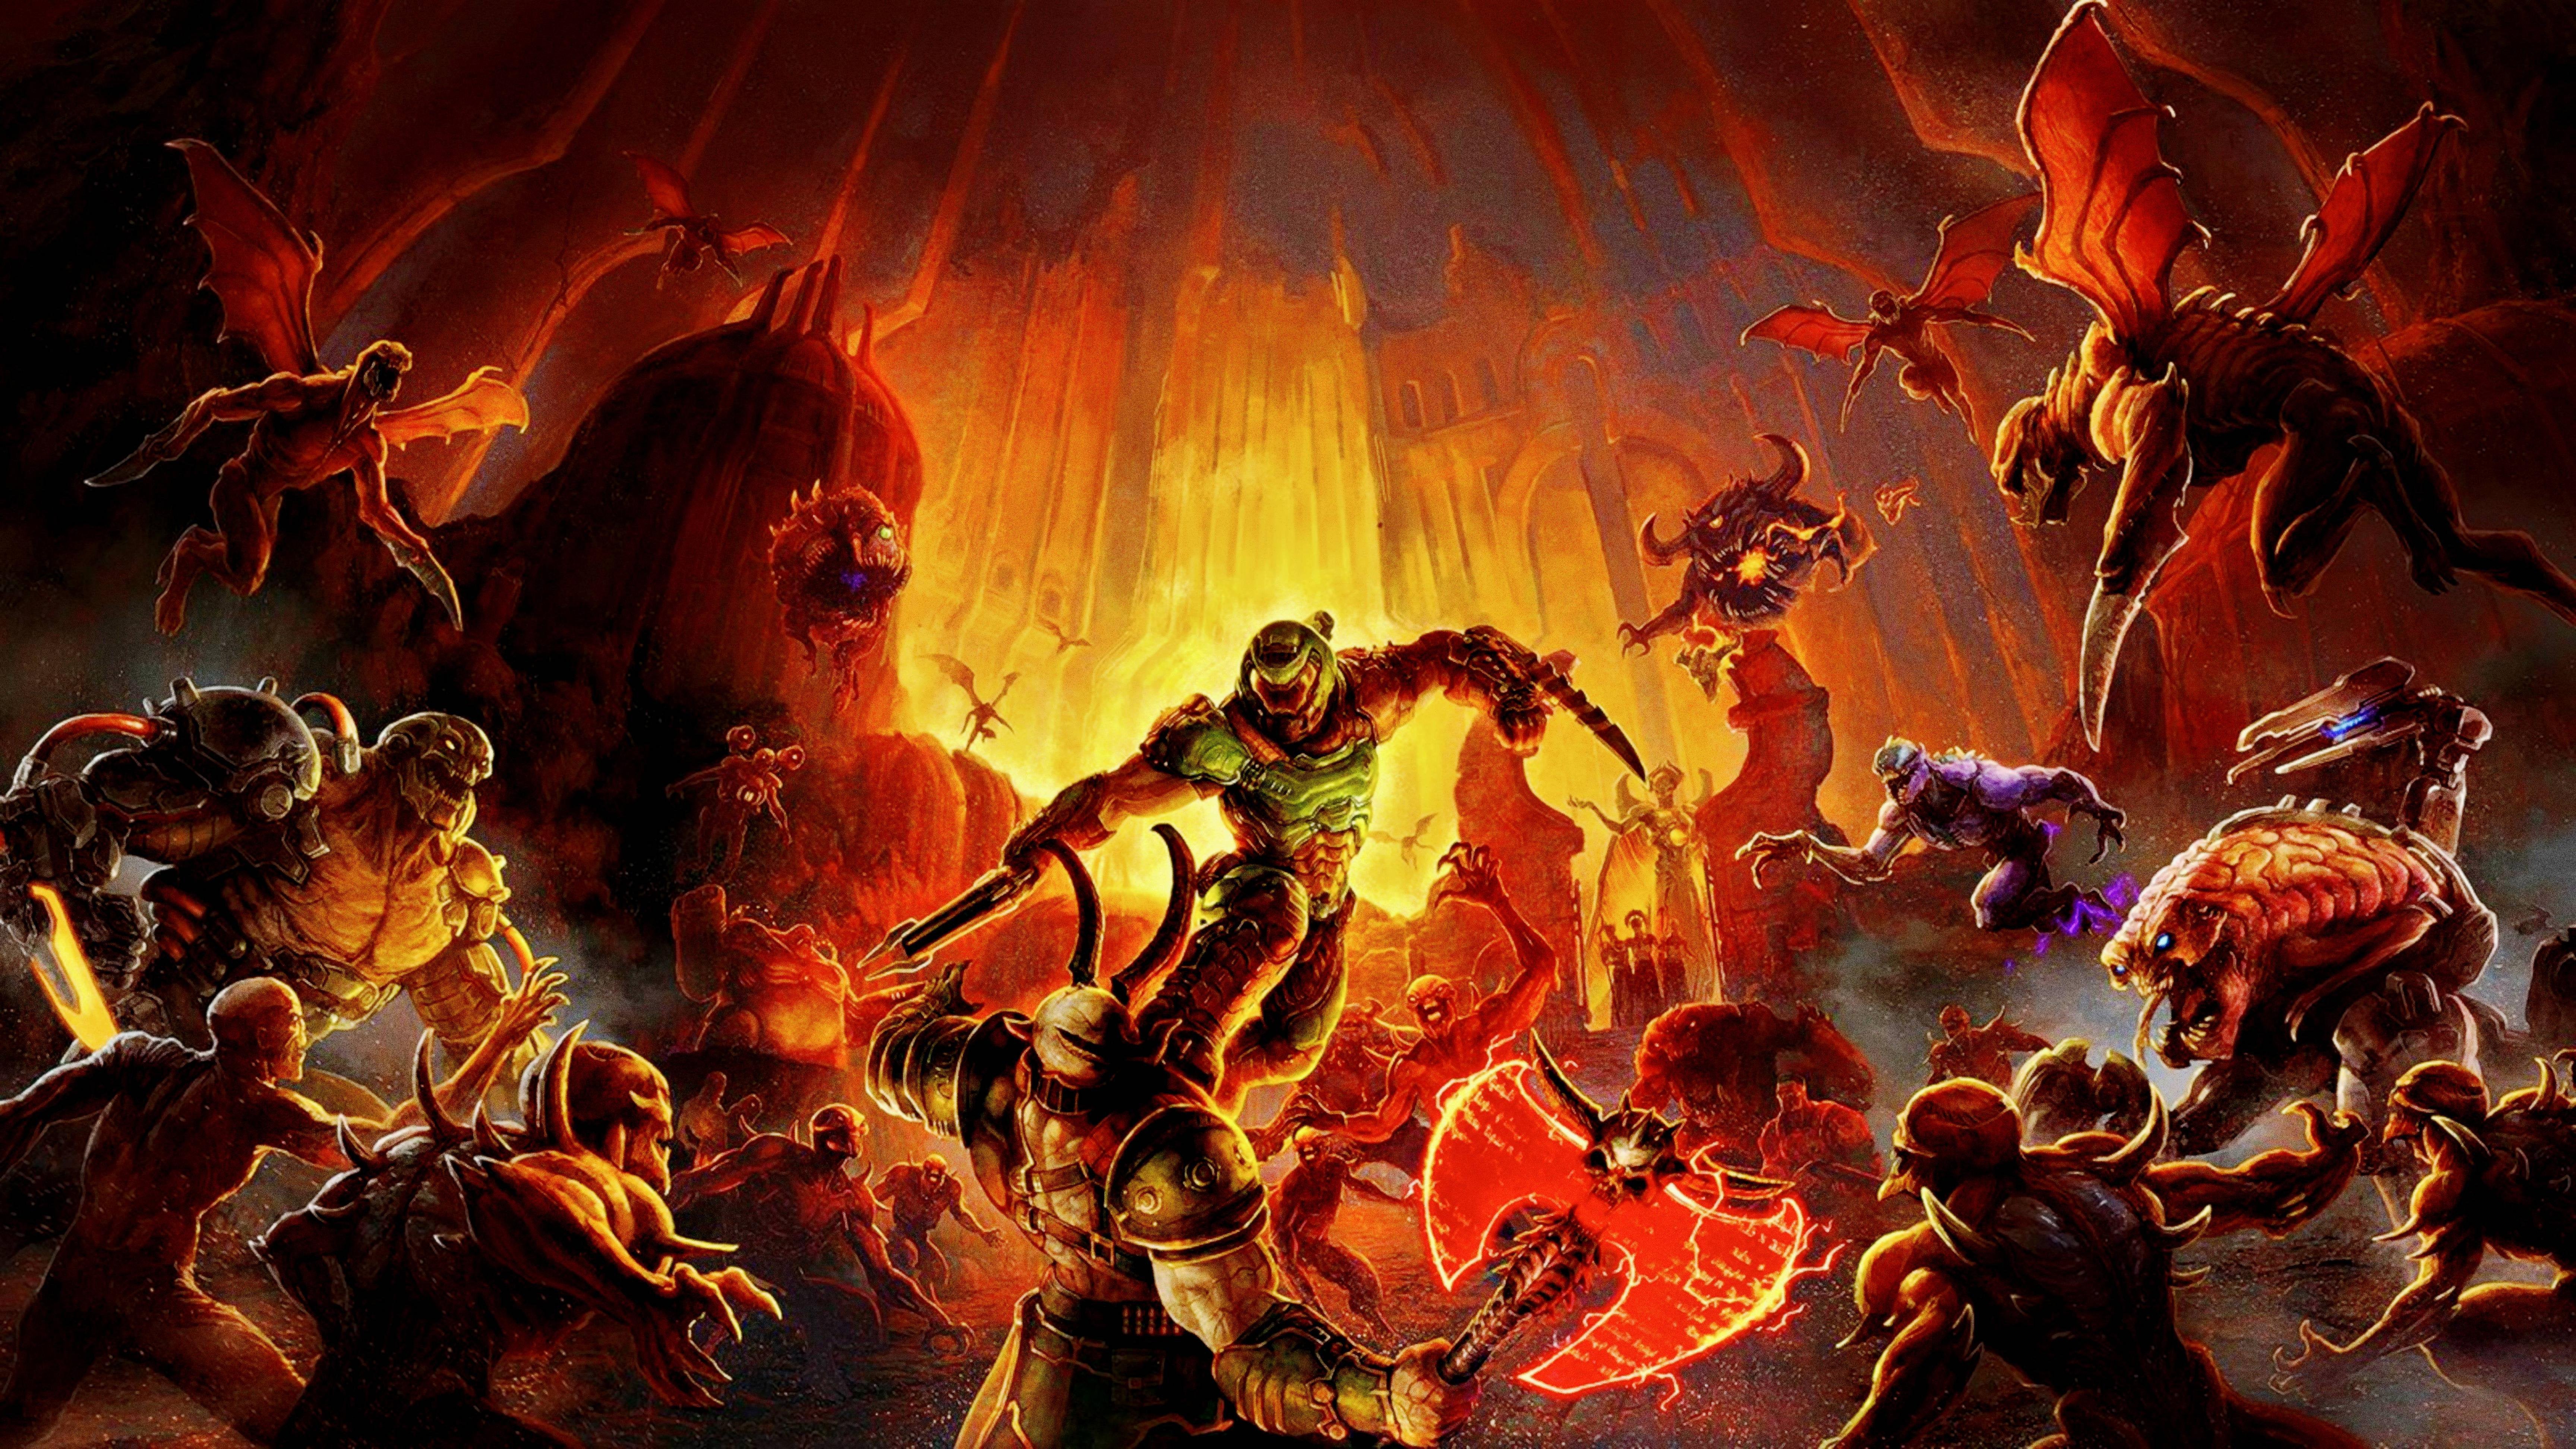 I Wanted A Doom Eternal Wallpaper That Would Look Good Spanning My